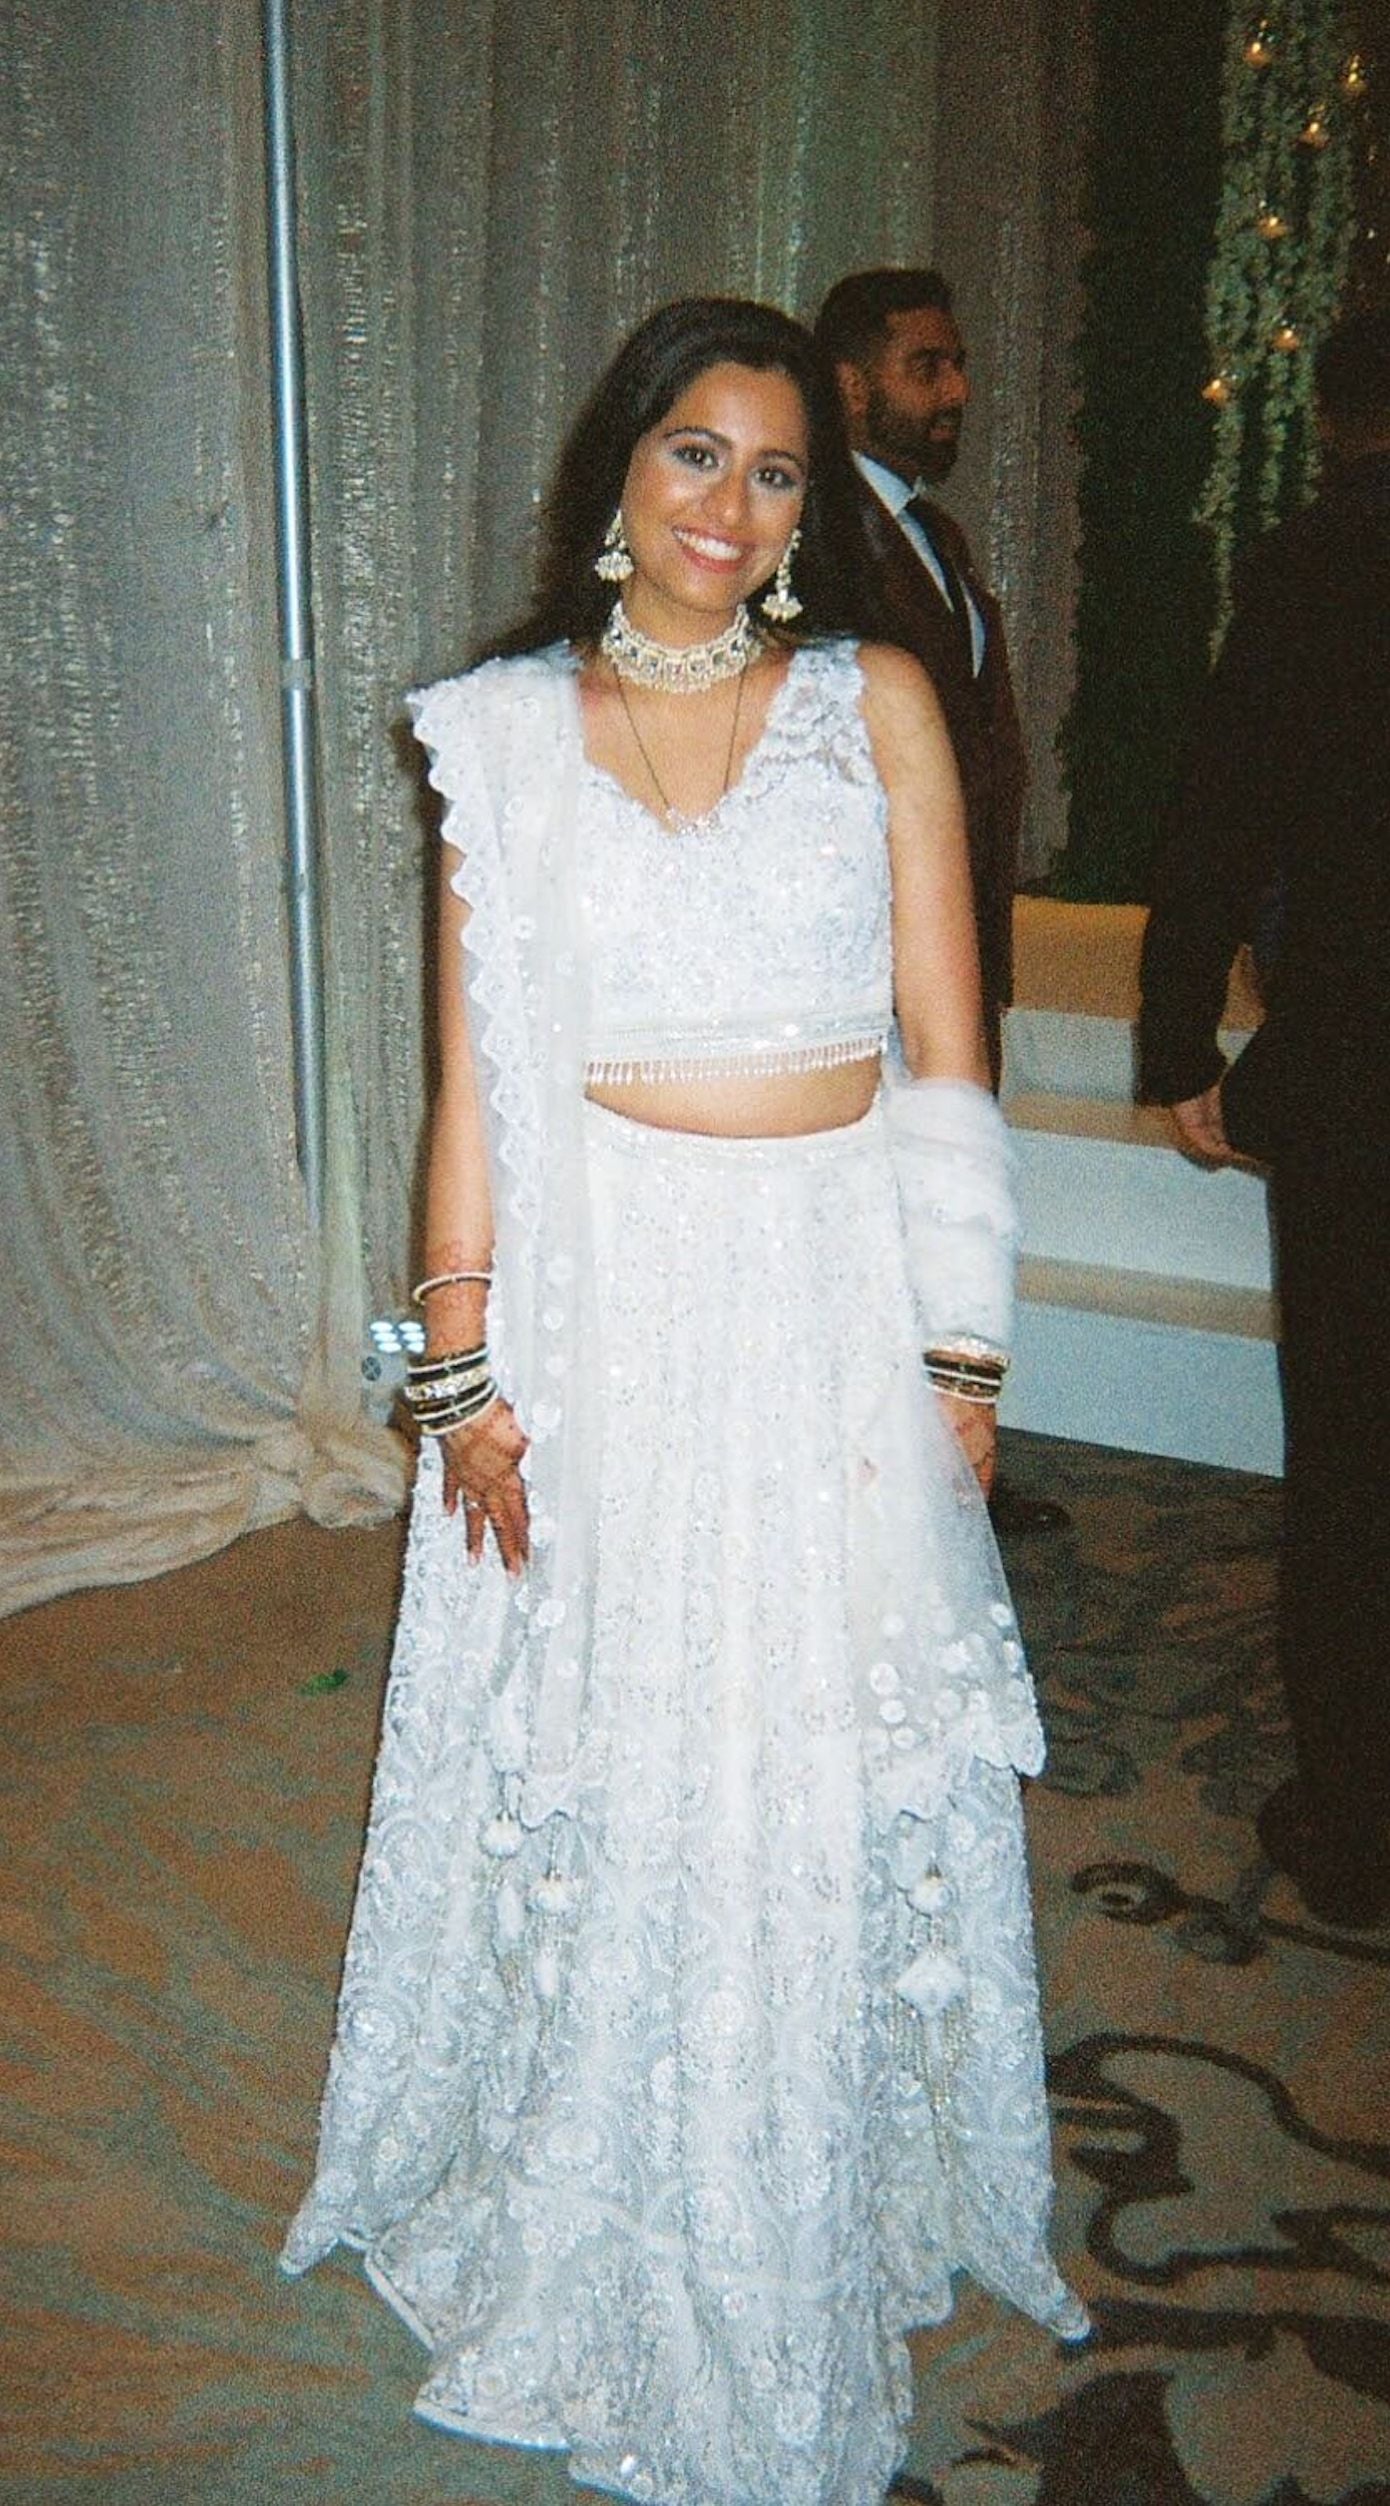 The Rucha Lehenga is a white hand-embroidered lehenga adorned with Swarovski crystals. It features a v-neck blouse with two tie details in the back. It comes with a completely detachable can-can. 